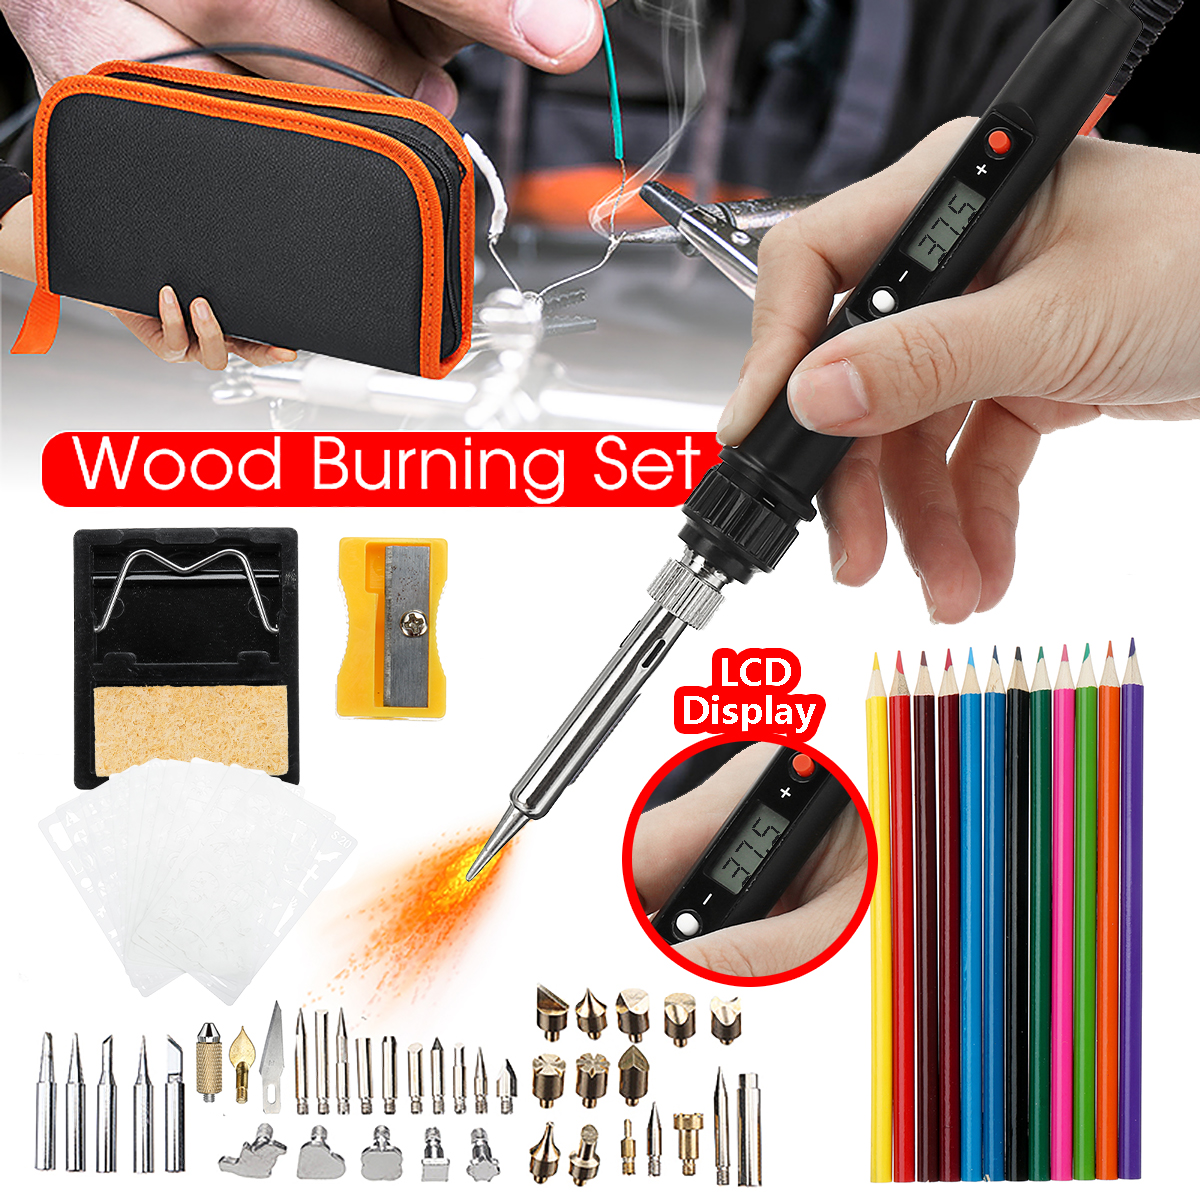 65Pcs-60W-Electric-Solder-Iron-Tool-Kit-Wood-Burning-Pen-Carft-Pyrography-Welding-Tips-1557723-1